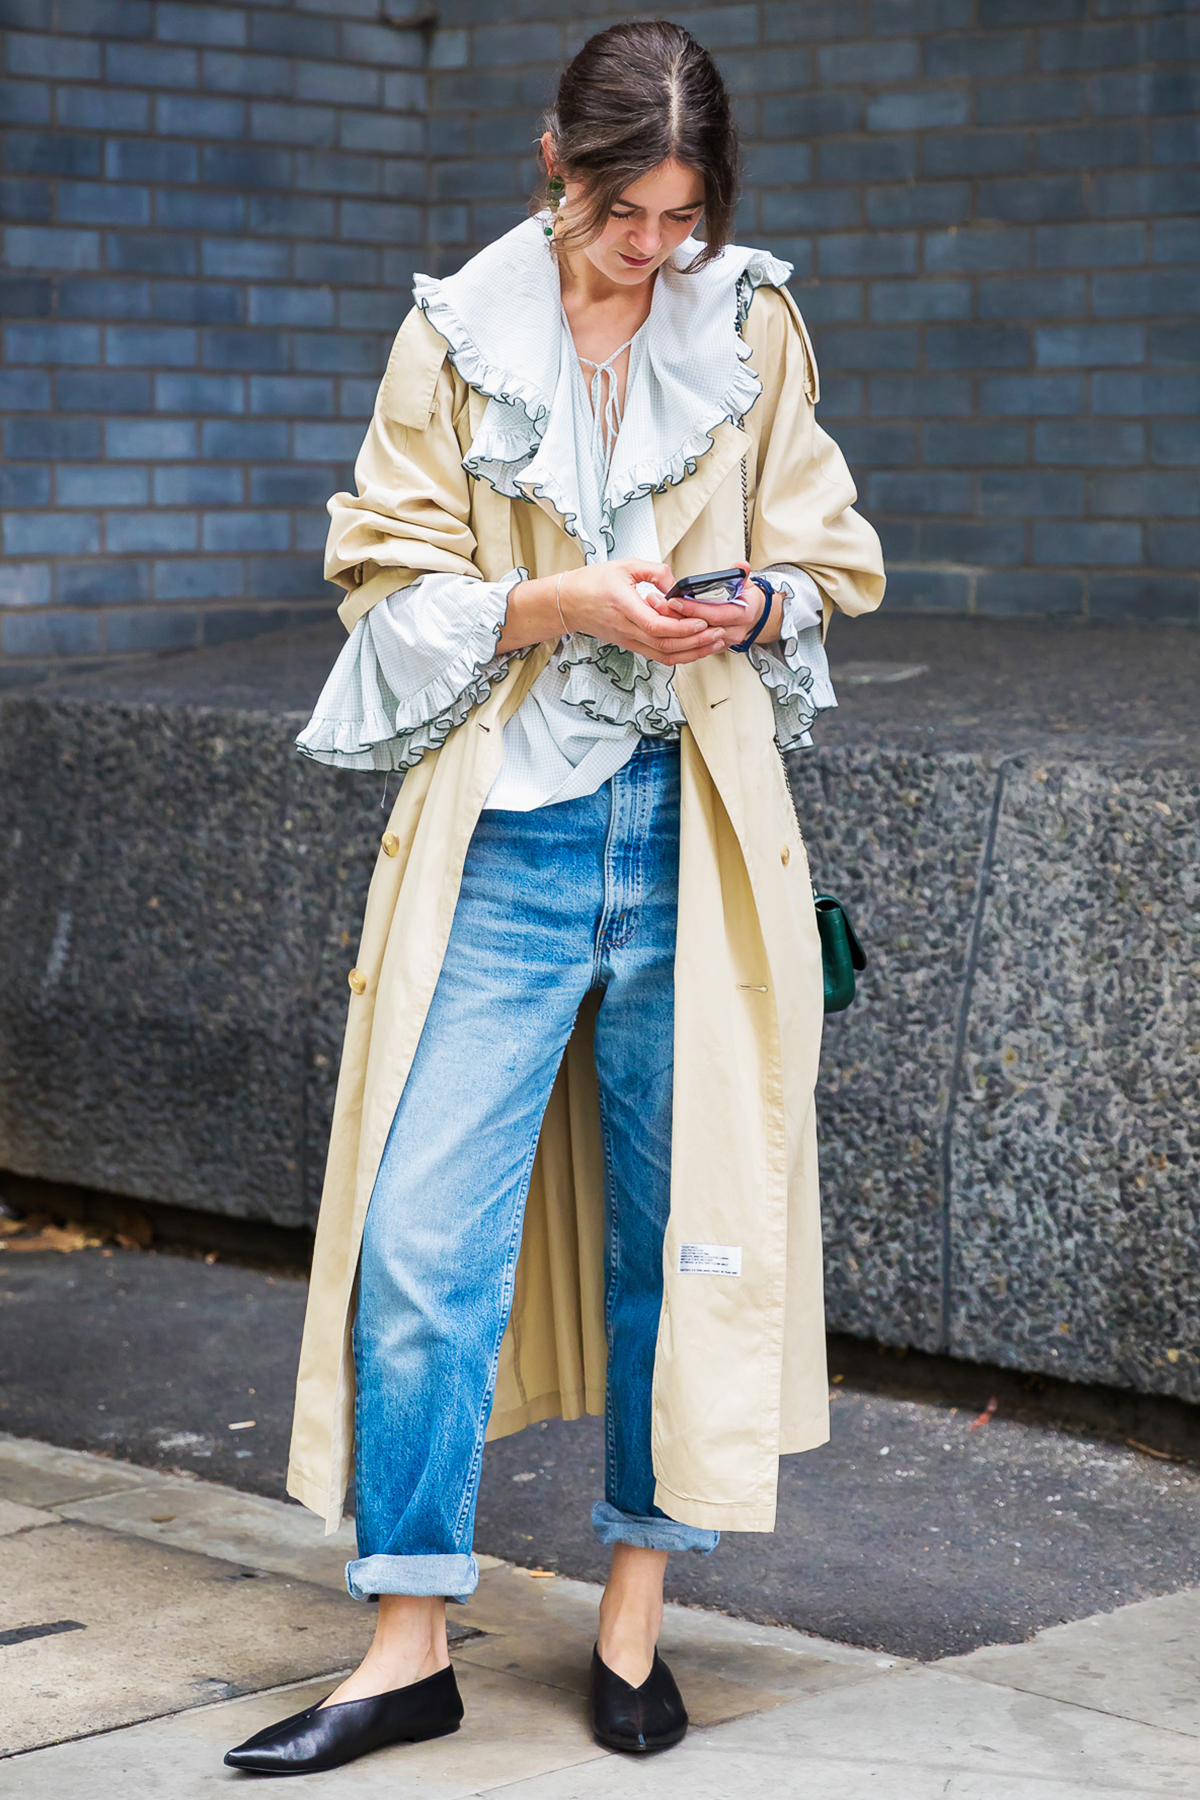 10 "Dad Jeans" Outfits to Try This Spring | WhoWhatWear.com | Bloglovin’